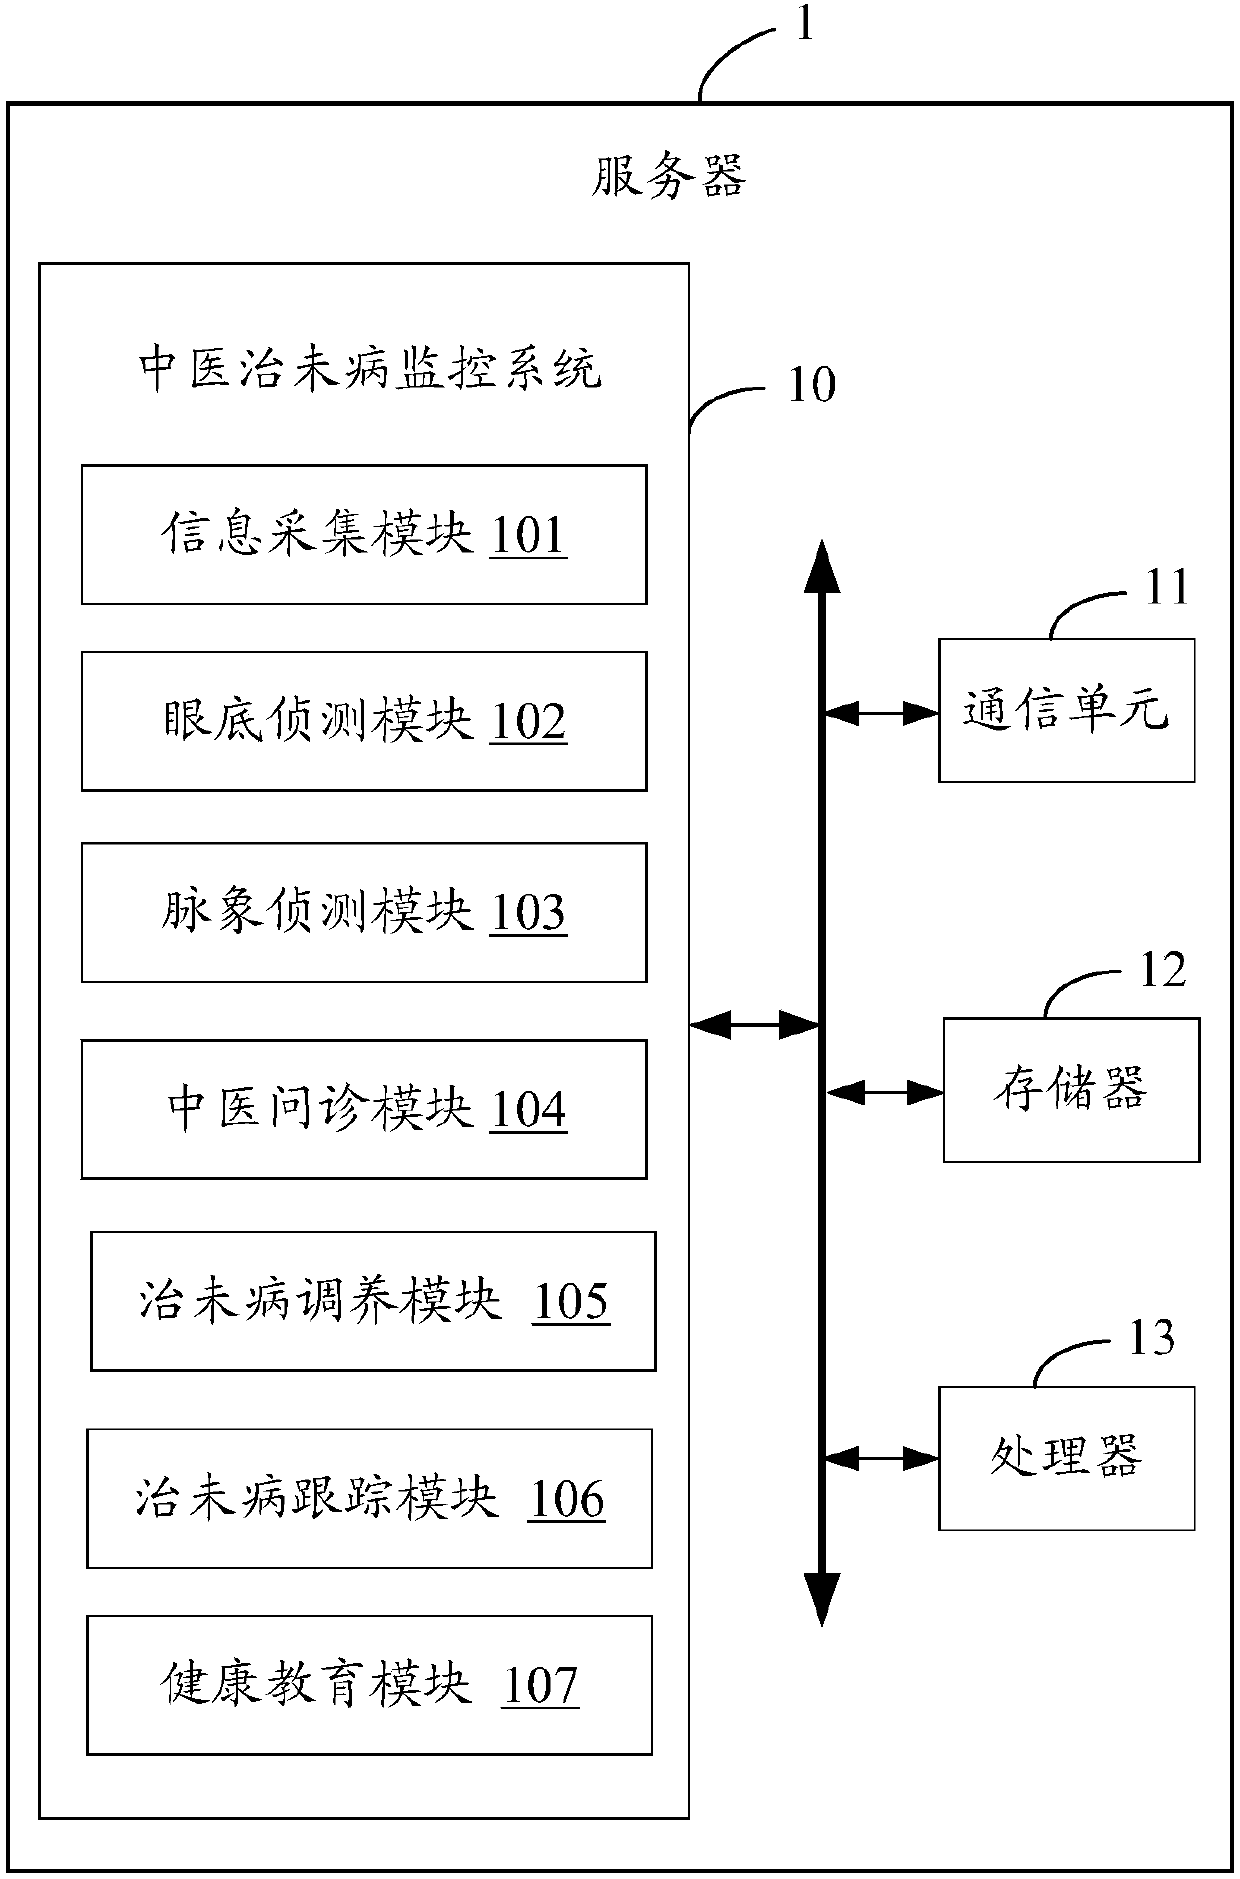 Traditional Chinese medicine disease preventative treatment monitoring system based on fundus camera and method